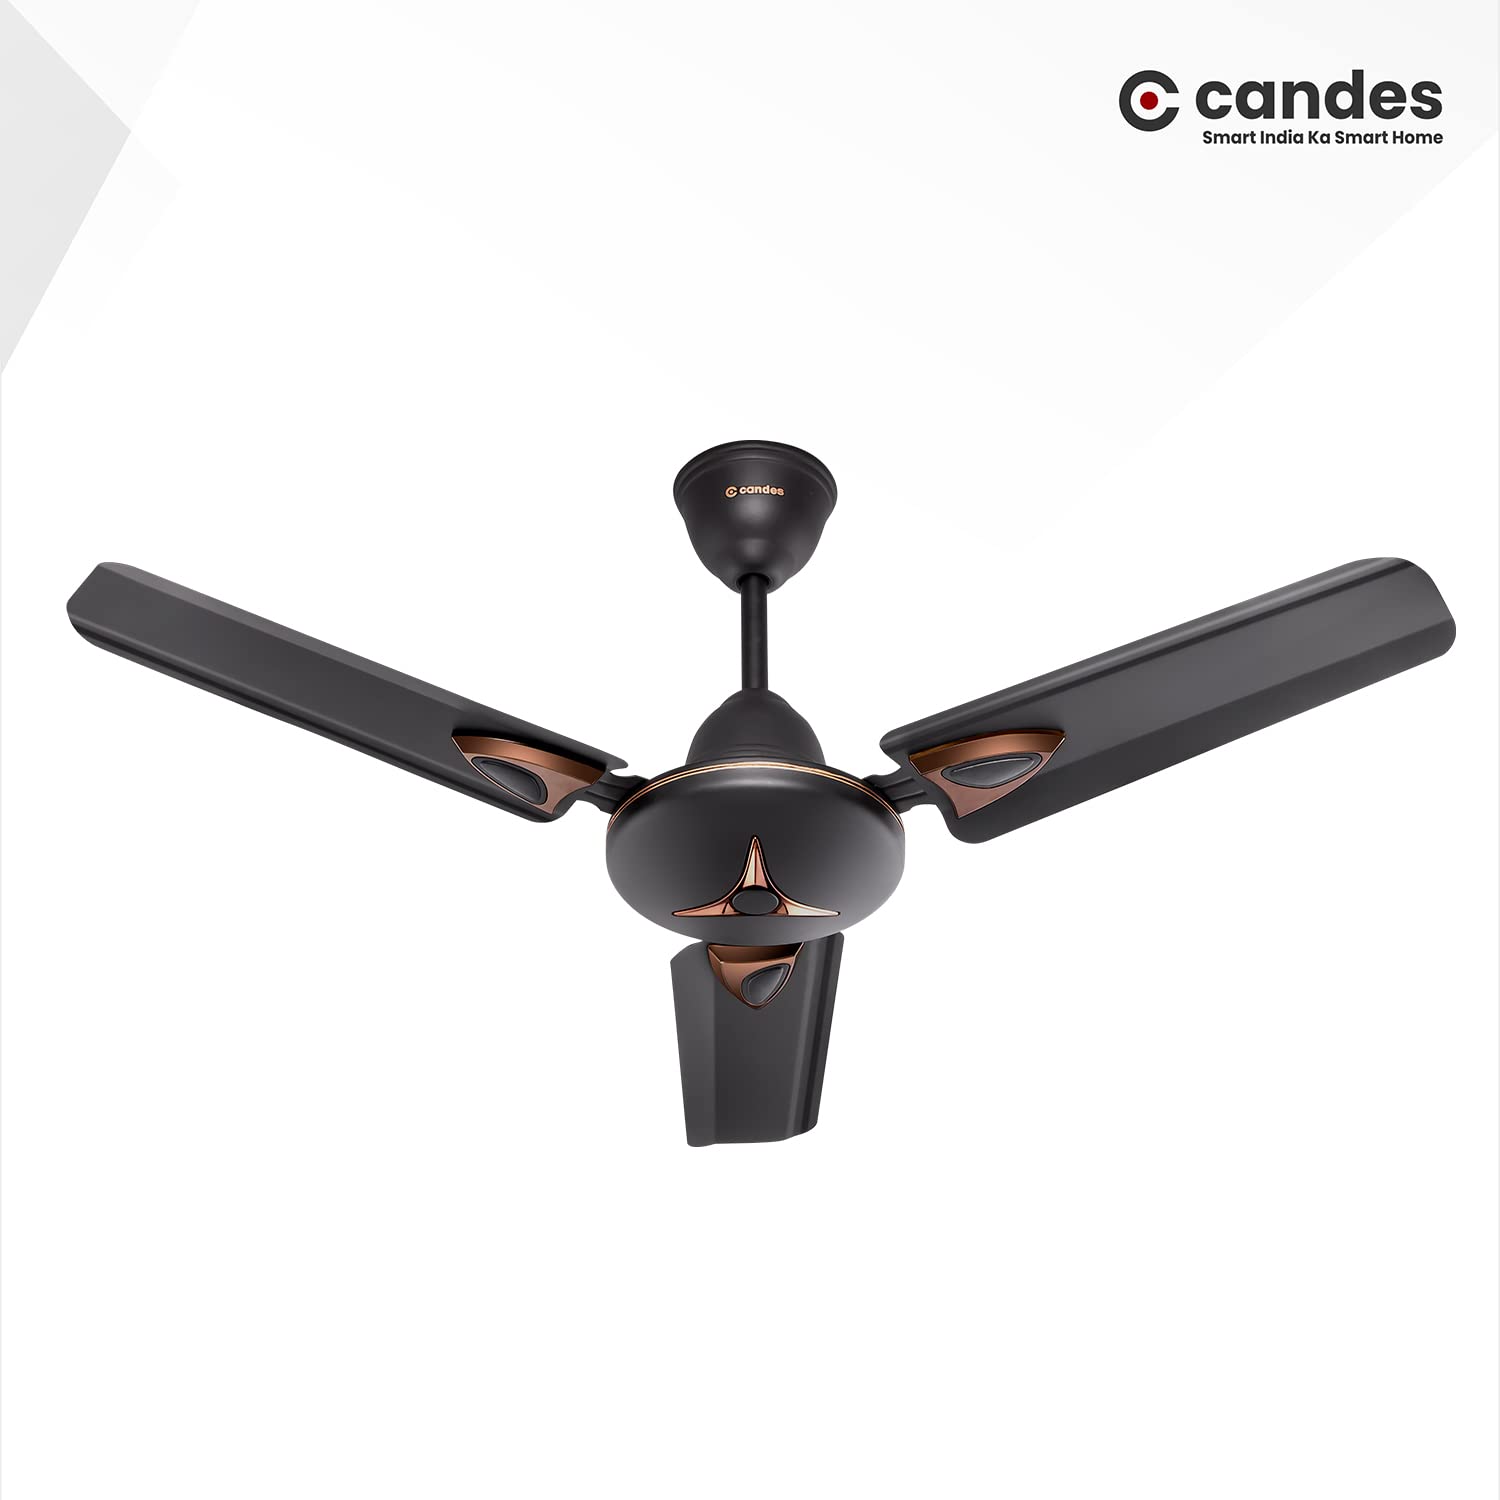 Candes Amaze 900mm /36 inch High Speed Anti-dust Decorative 5 Star Rated Ceiling Fan 440 RPM with 2 Years Warranty (Pack of 2, Coffee Brown)